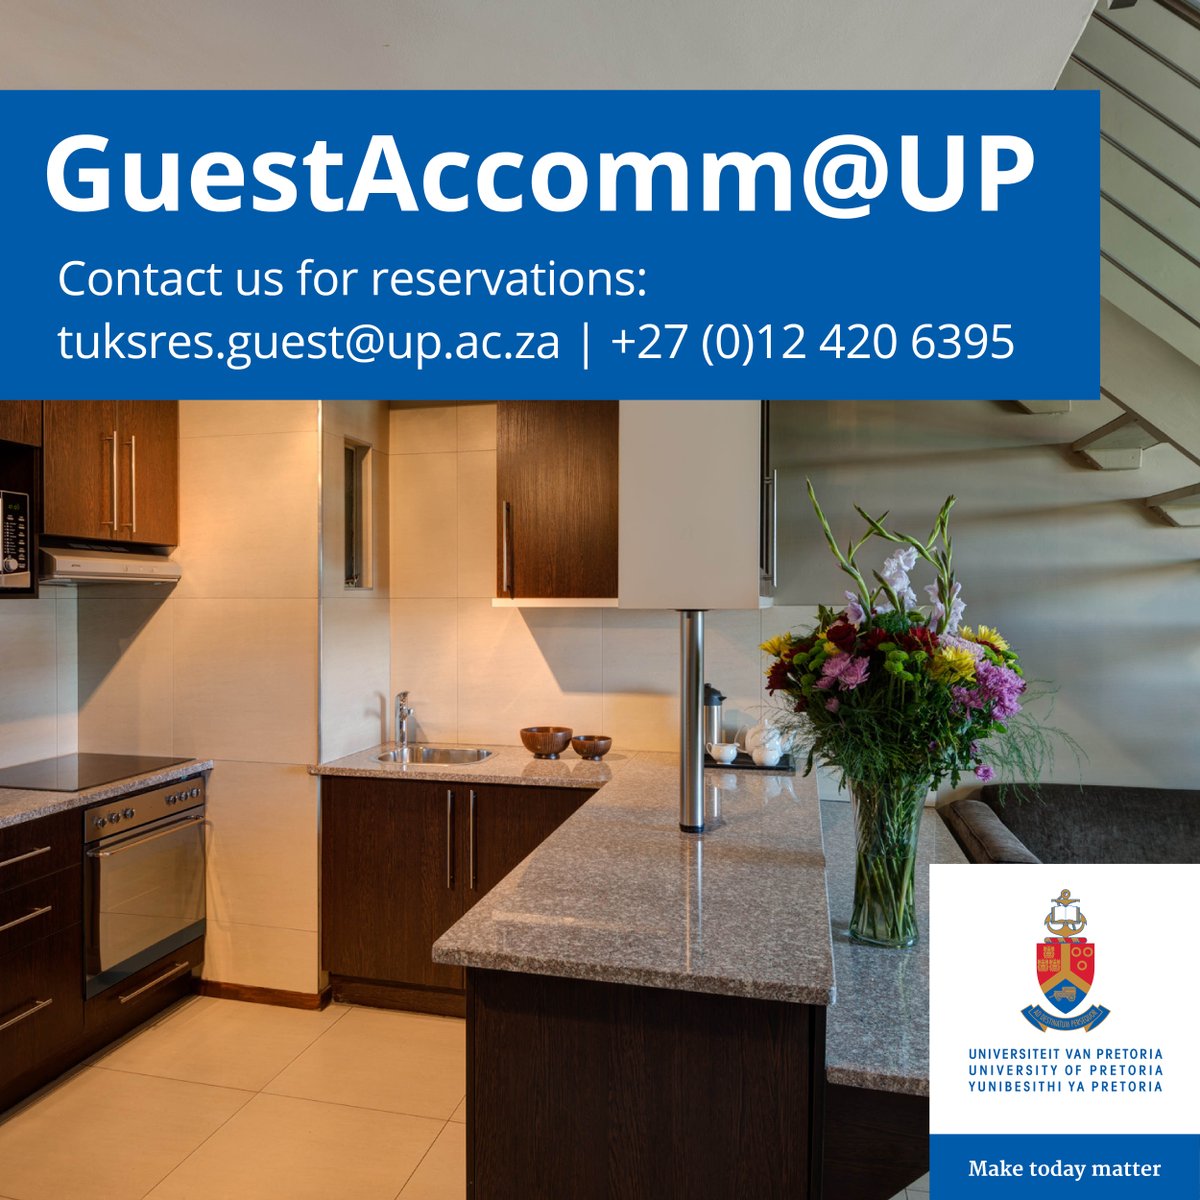 Are you a postgraduate or a postdoctoral fellow looking for informal accommodation close to UP campuses? GuestAccomm@UP has got you covered! For more information, please click here: ow.ly/TW3f50Rbflr

#UPGraduationIsCalling #UniversityOfPretoria